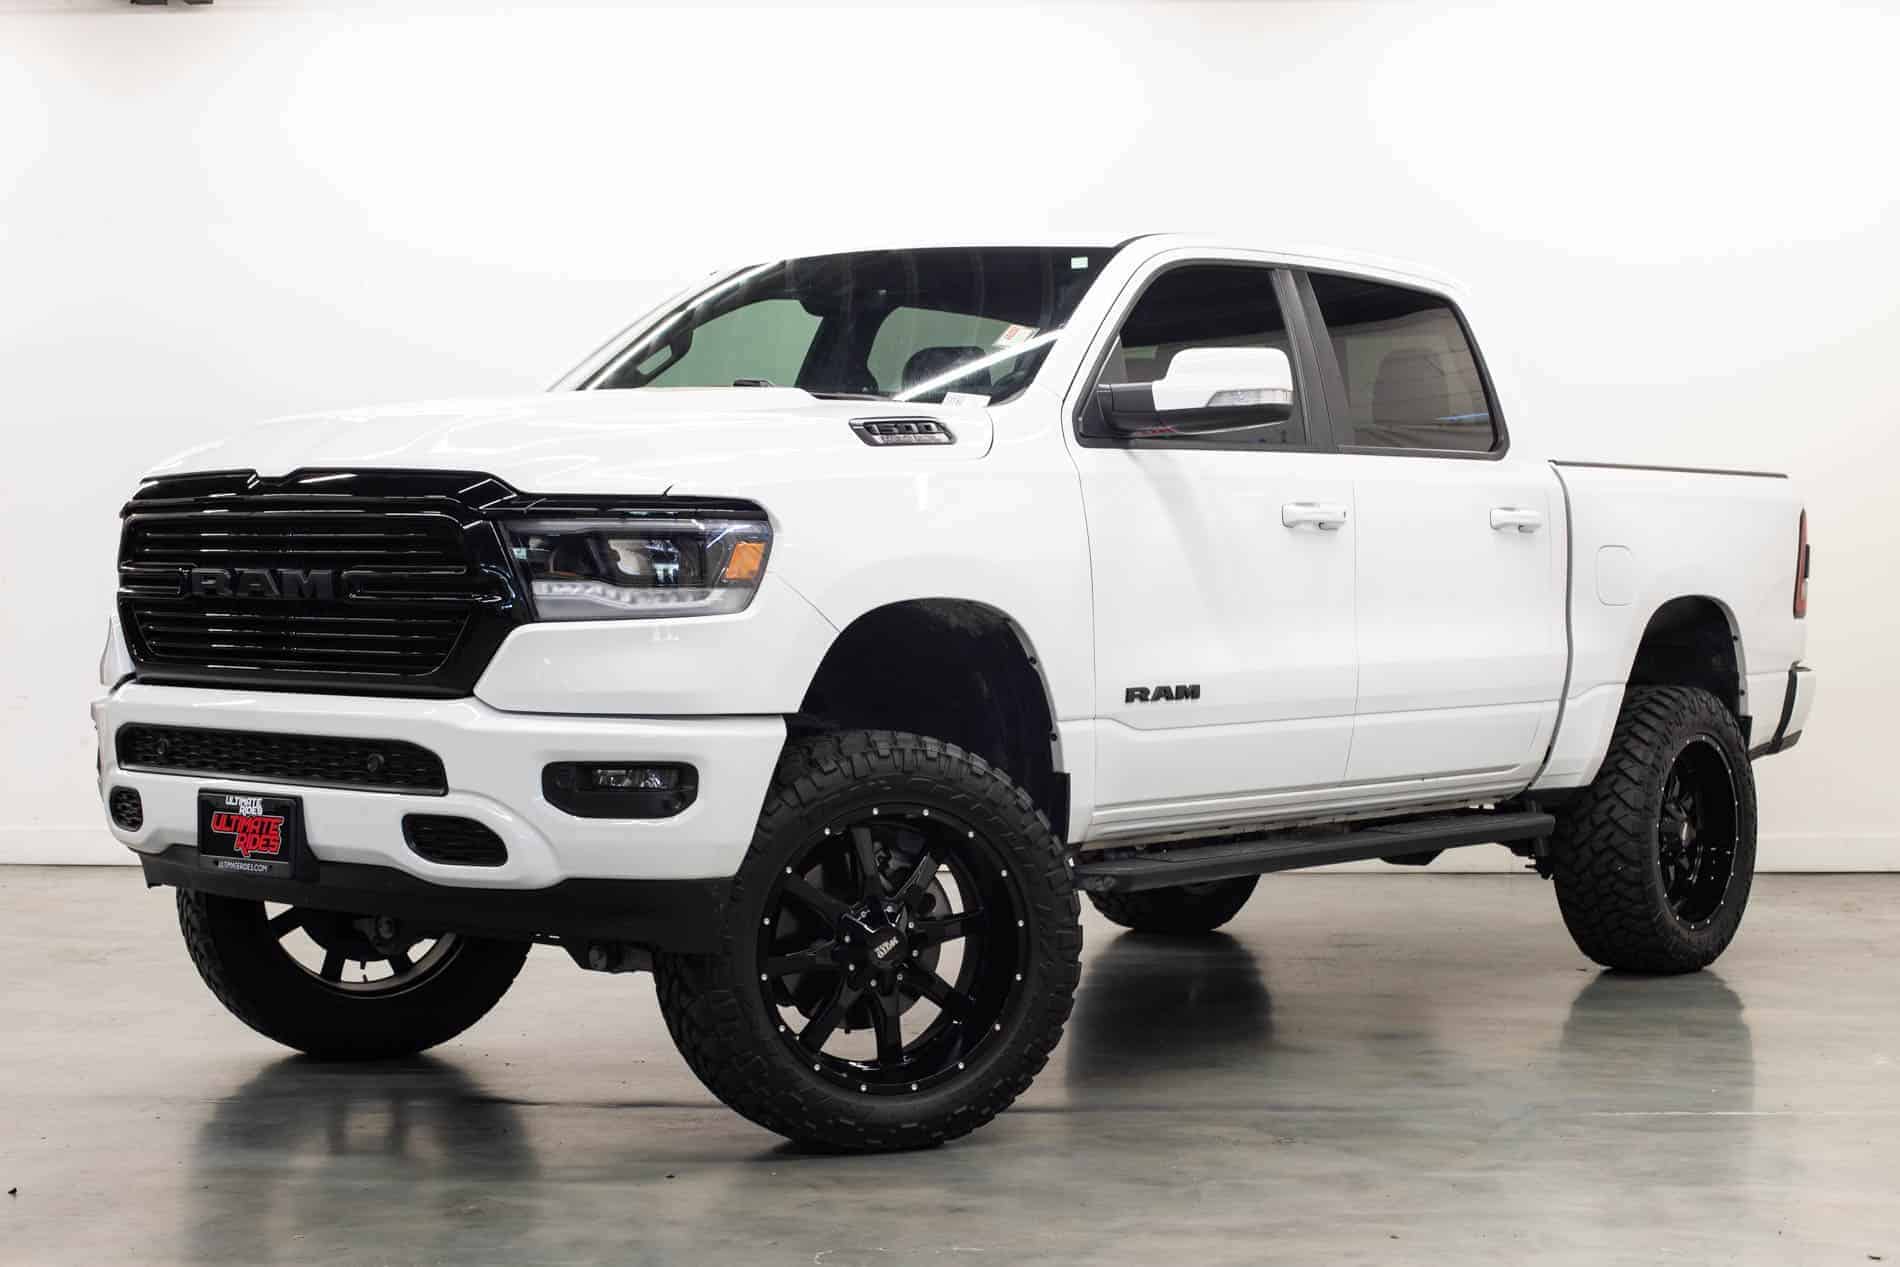 Lifted Trucks for Sale Indiana